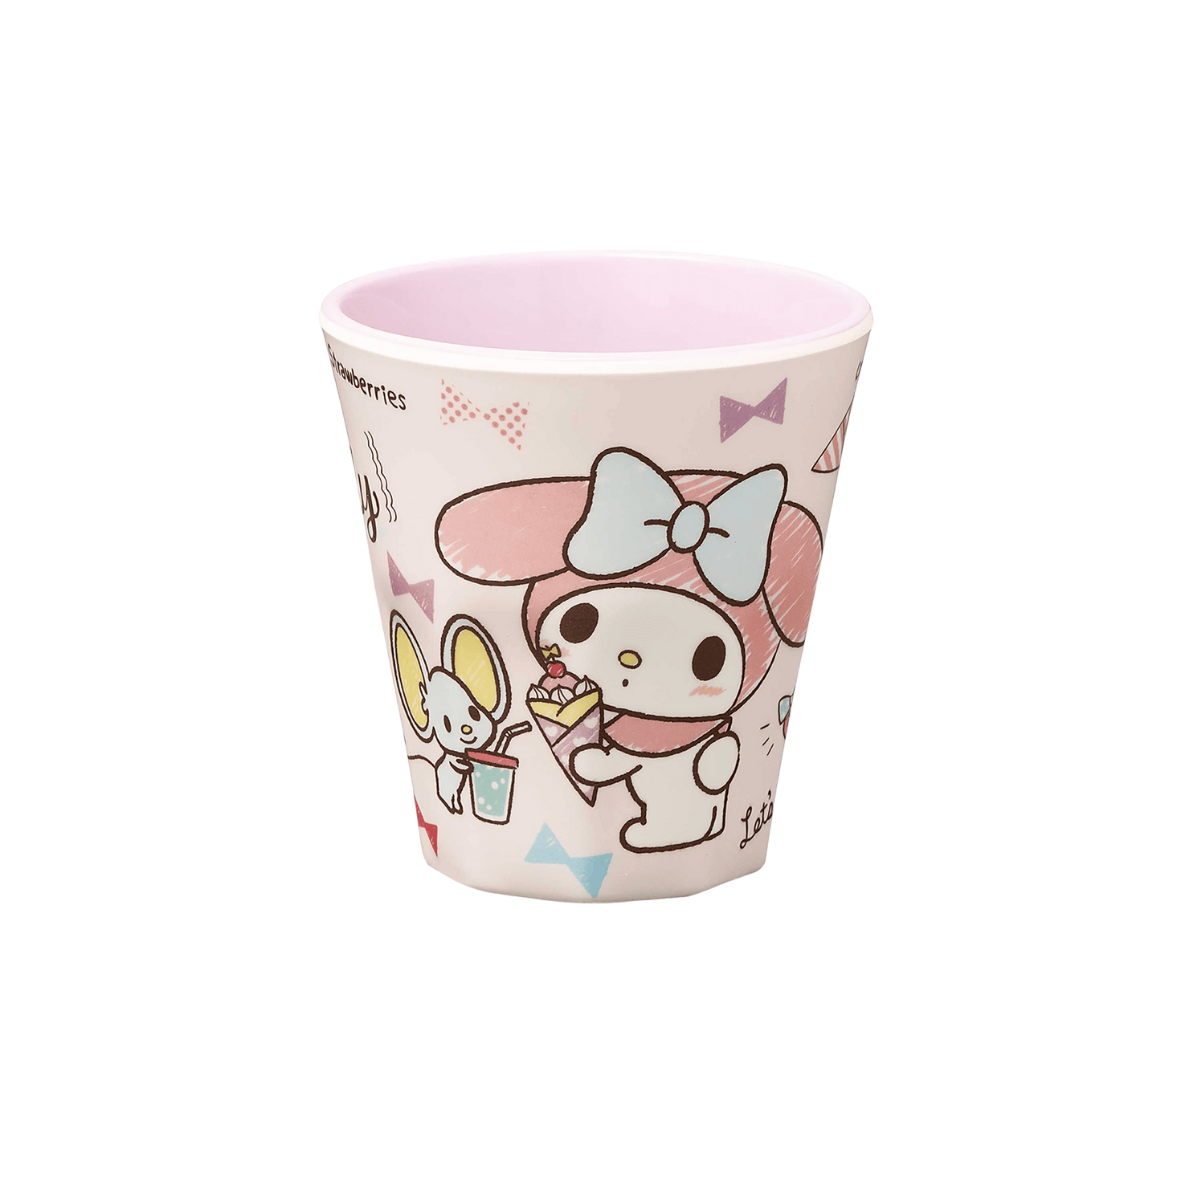 My Melody Snack Time Melamine Cup Home Goods CLEVER IDIOTS   